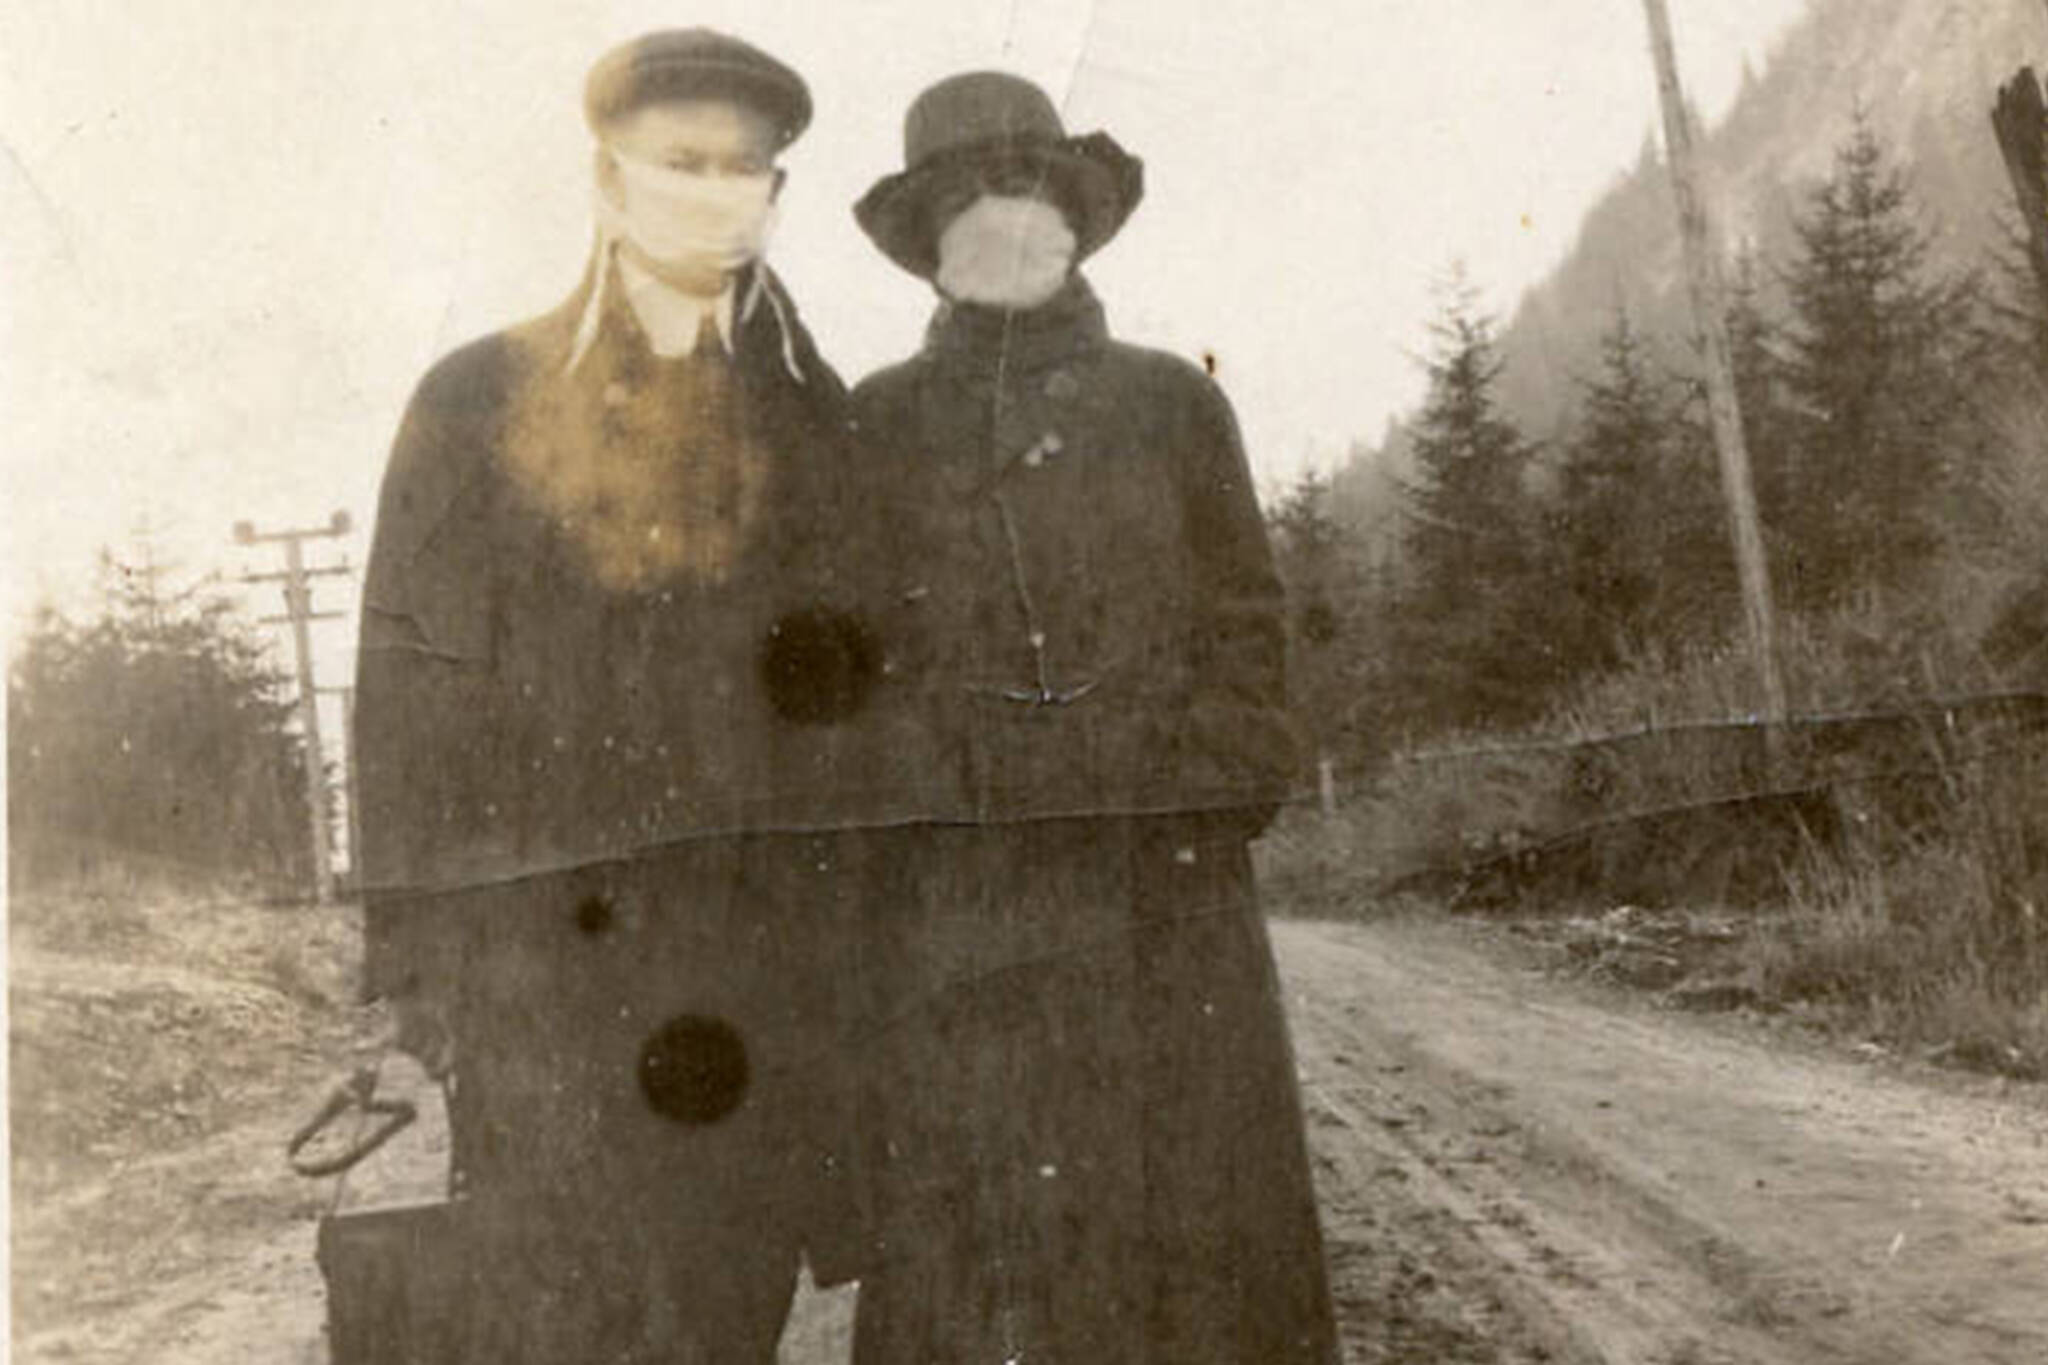 Alaska State Library - Historical Collections 
This photo from the Harry and Carrie Dott photograph collection shows two masked people together during the 1918 flu pandemic. The photo has been cropped from its original dimensions.